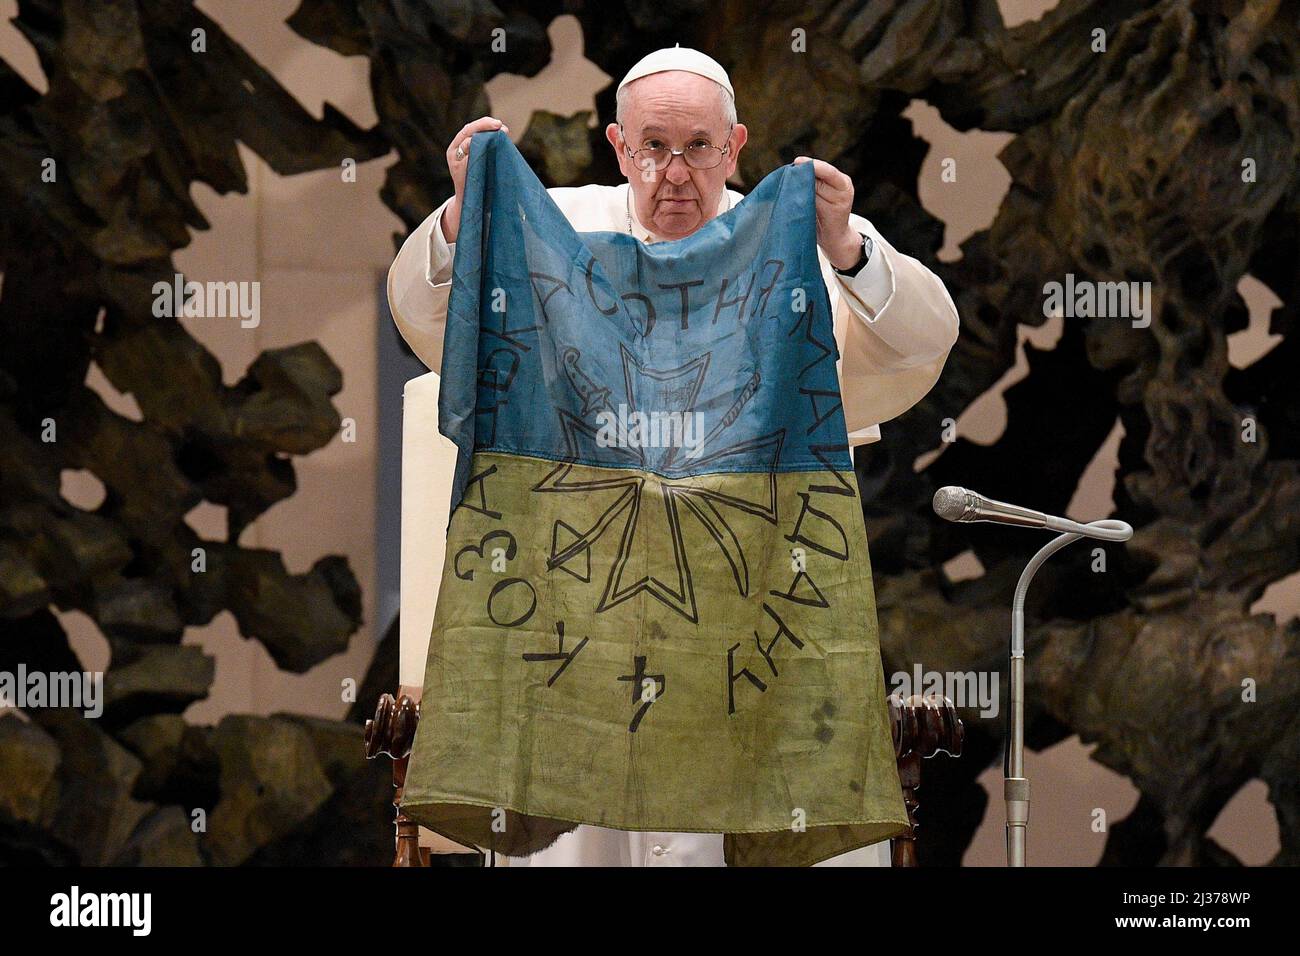 Vatican, Vatican. 06th Apr, 2022. Italy, Rome, Vatican, 2022/04/06.Pope Francis shows a flag that he said was sent to him from Bucha, Ukraine, during his weekly general audience in the Paul VI Hall, at the Vatican. Photograph by Vatican media/Catholic Press Photo RESTRICTED TO EDITORIAL USE - NO MARKETING - NO ADVERTISING CAMPAIGNS. Credit: Independent Photo Agency/Alamy Live News Stock Photo